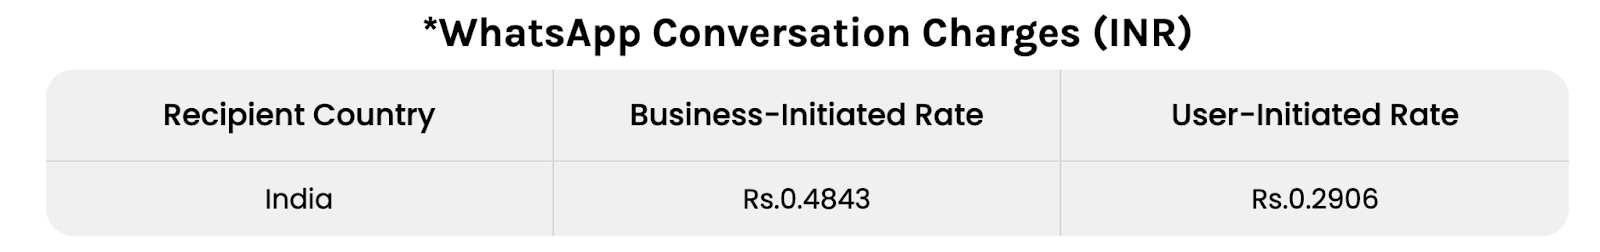 WhatsApp conversation charges